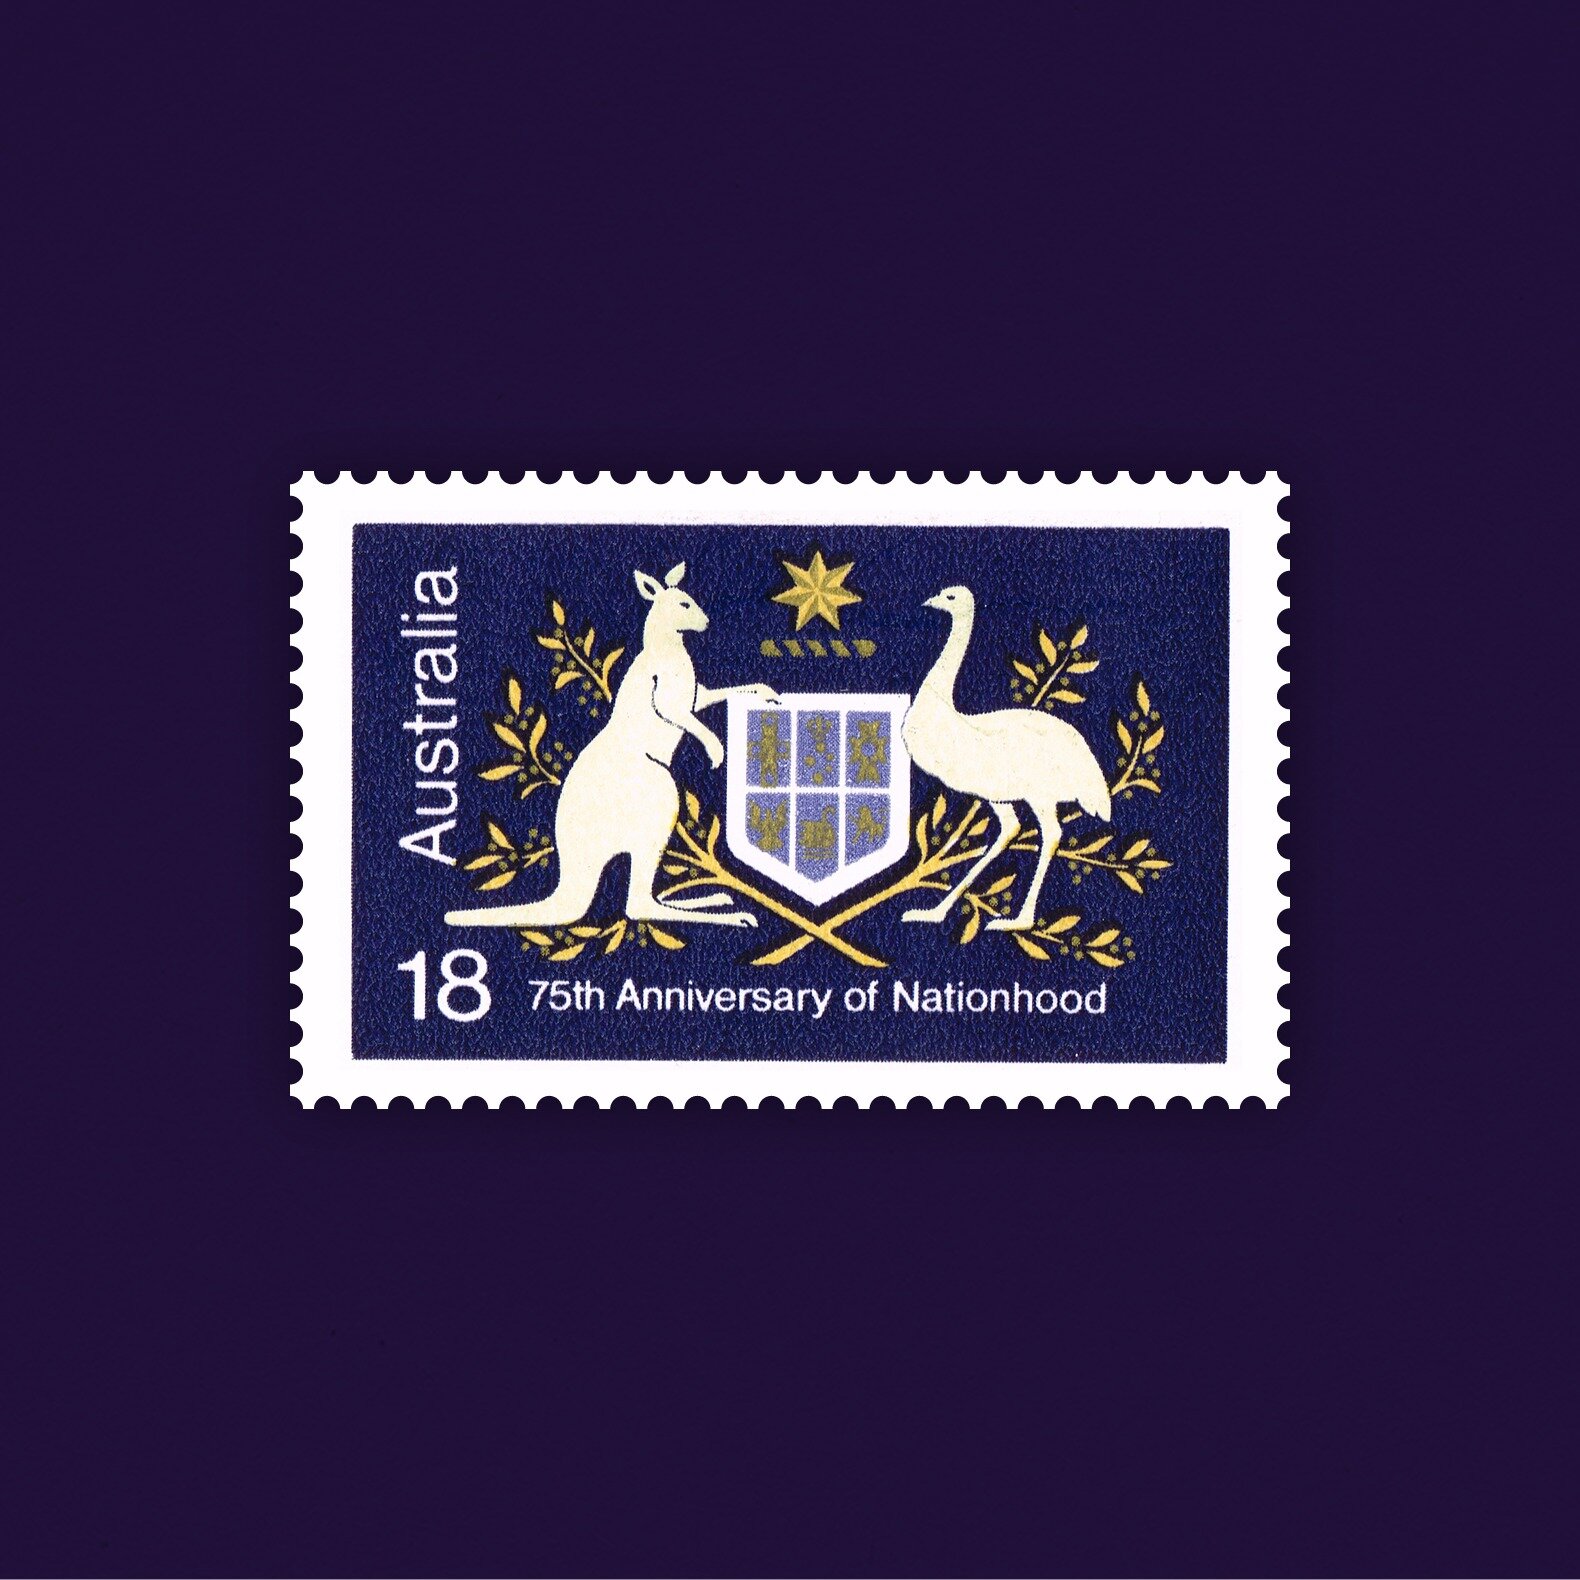 1976 75th Anniversary of Nationhood 

An 18c stamp, featuring the Australian Coat of Arms.

Technical Details

Stamp design: John Spatchurst

Denomination: 18c

Stamp size: 24.15 mm x 37.5 mm

Printer: RBA

Printing process: Photogravure 

Paper: Unw